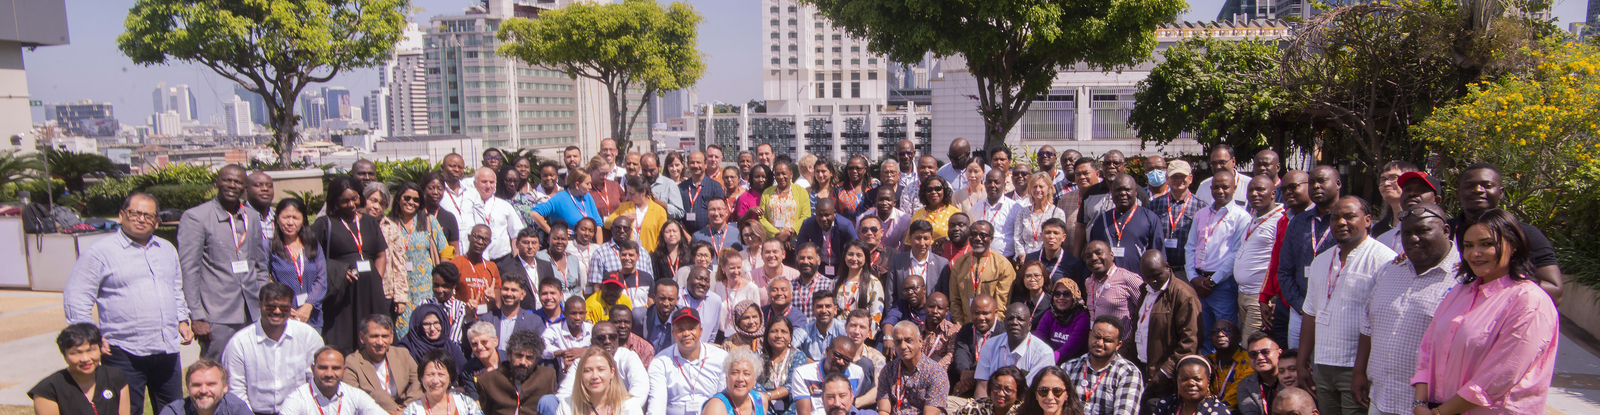 Participants of the Stop TB Partnership Community Summit